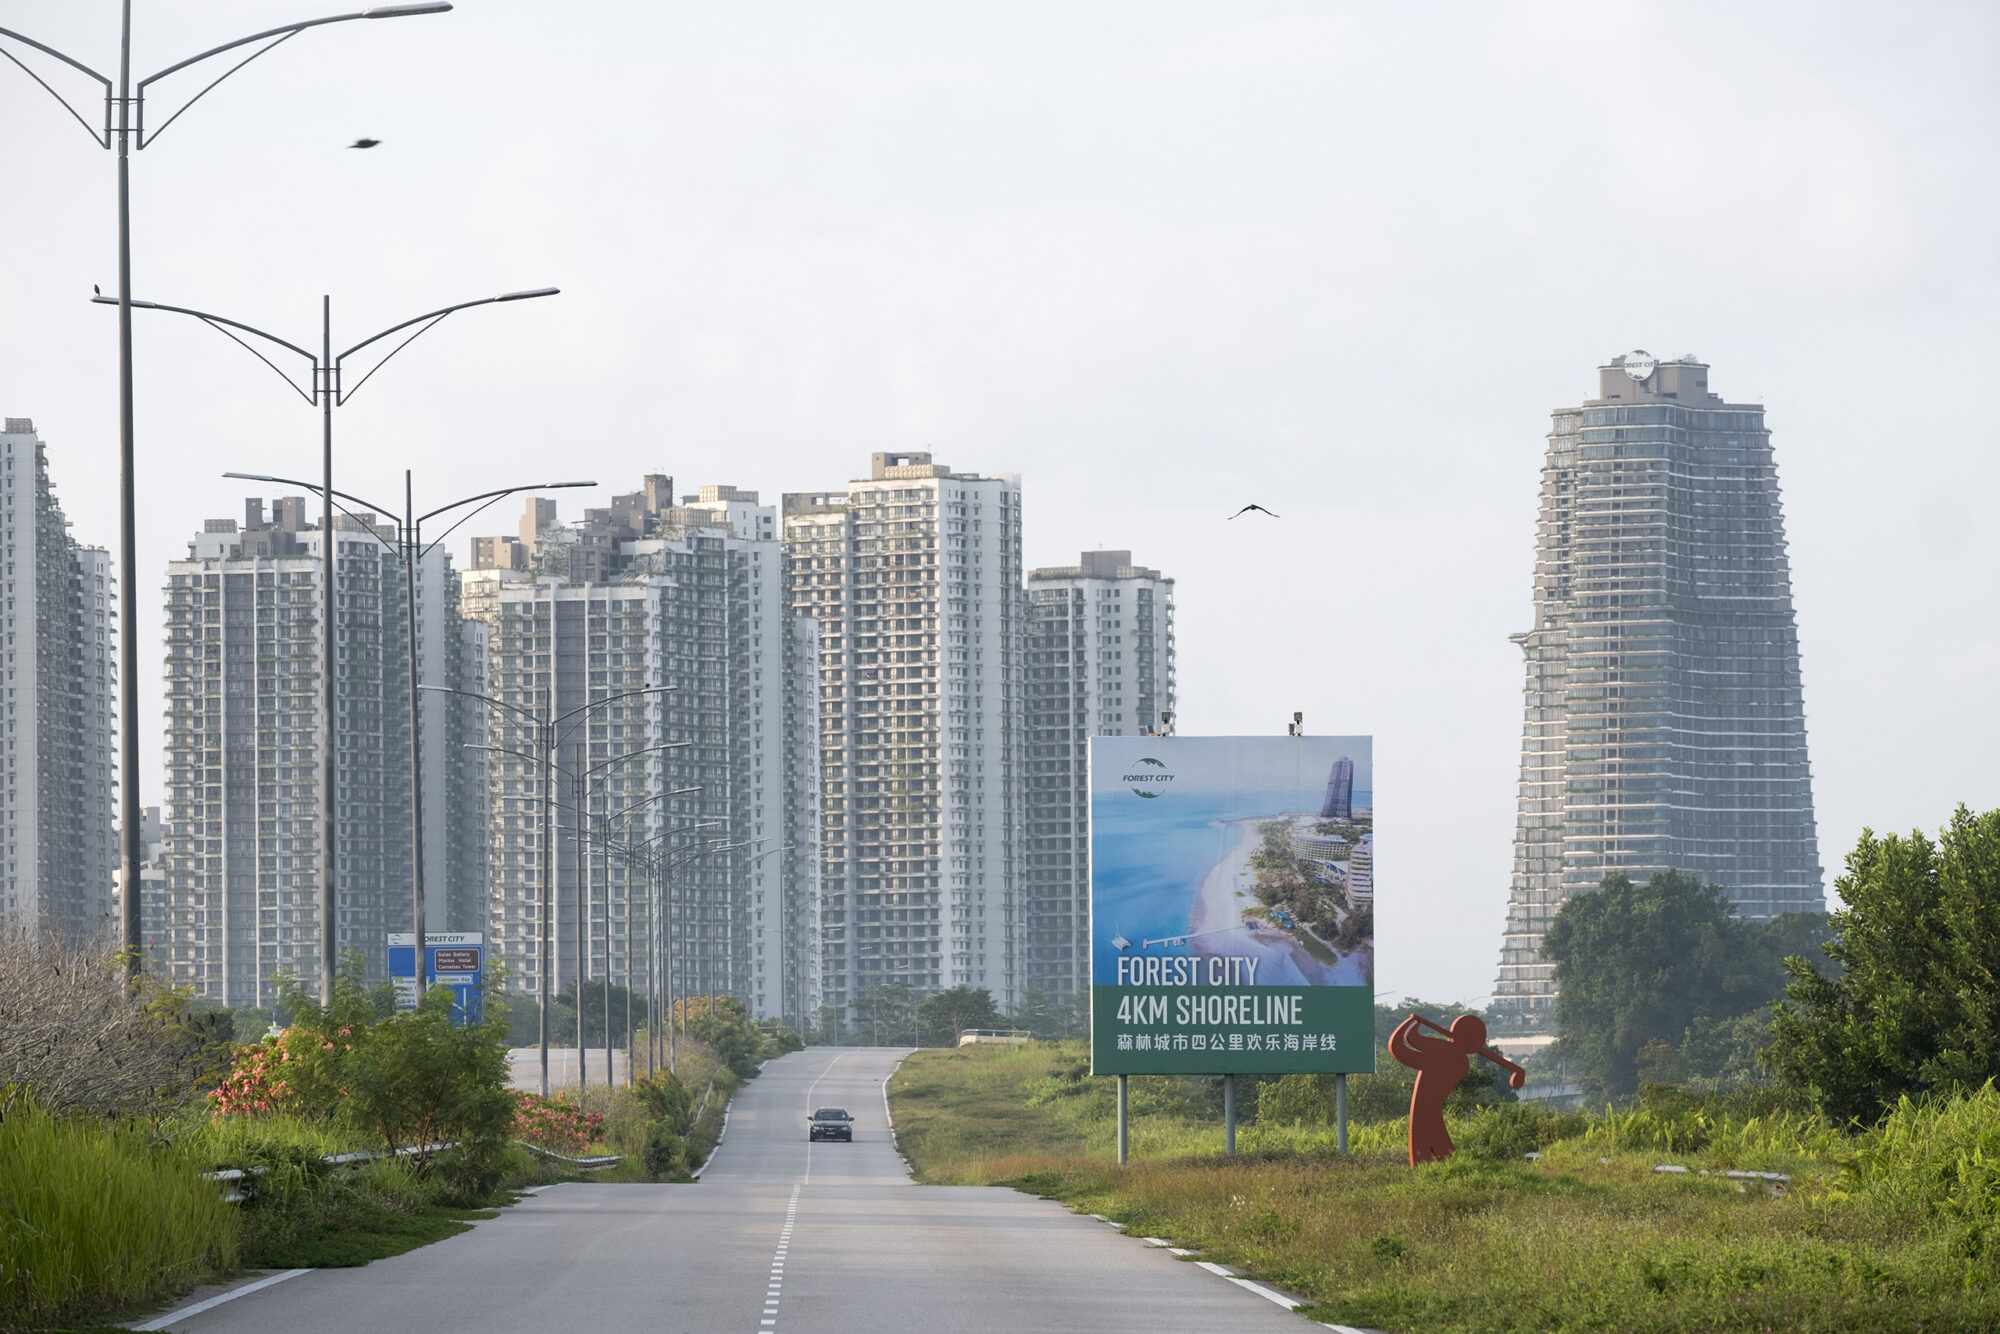 Advertisements are seen along the highway which links the reclaimed island on which Forest City was built to the mainland.